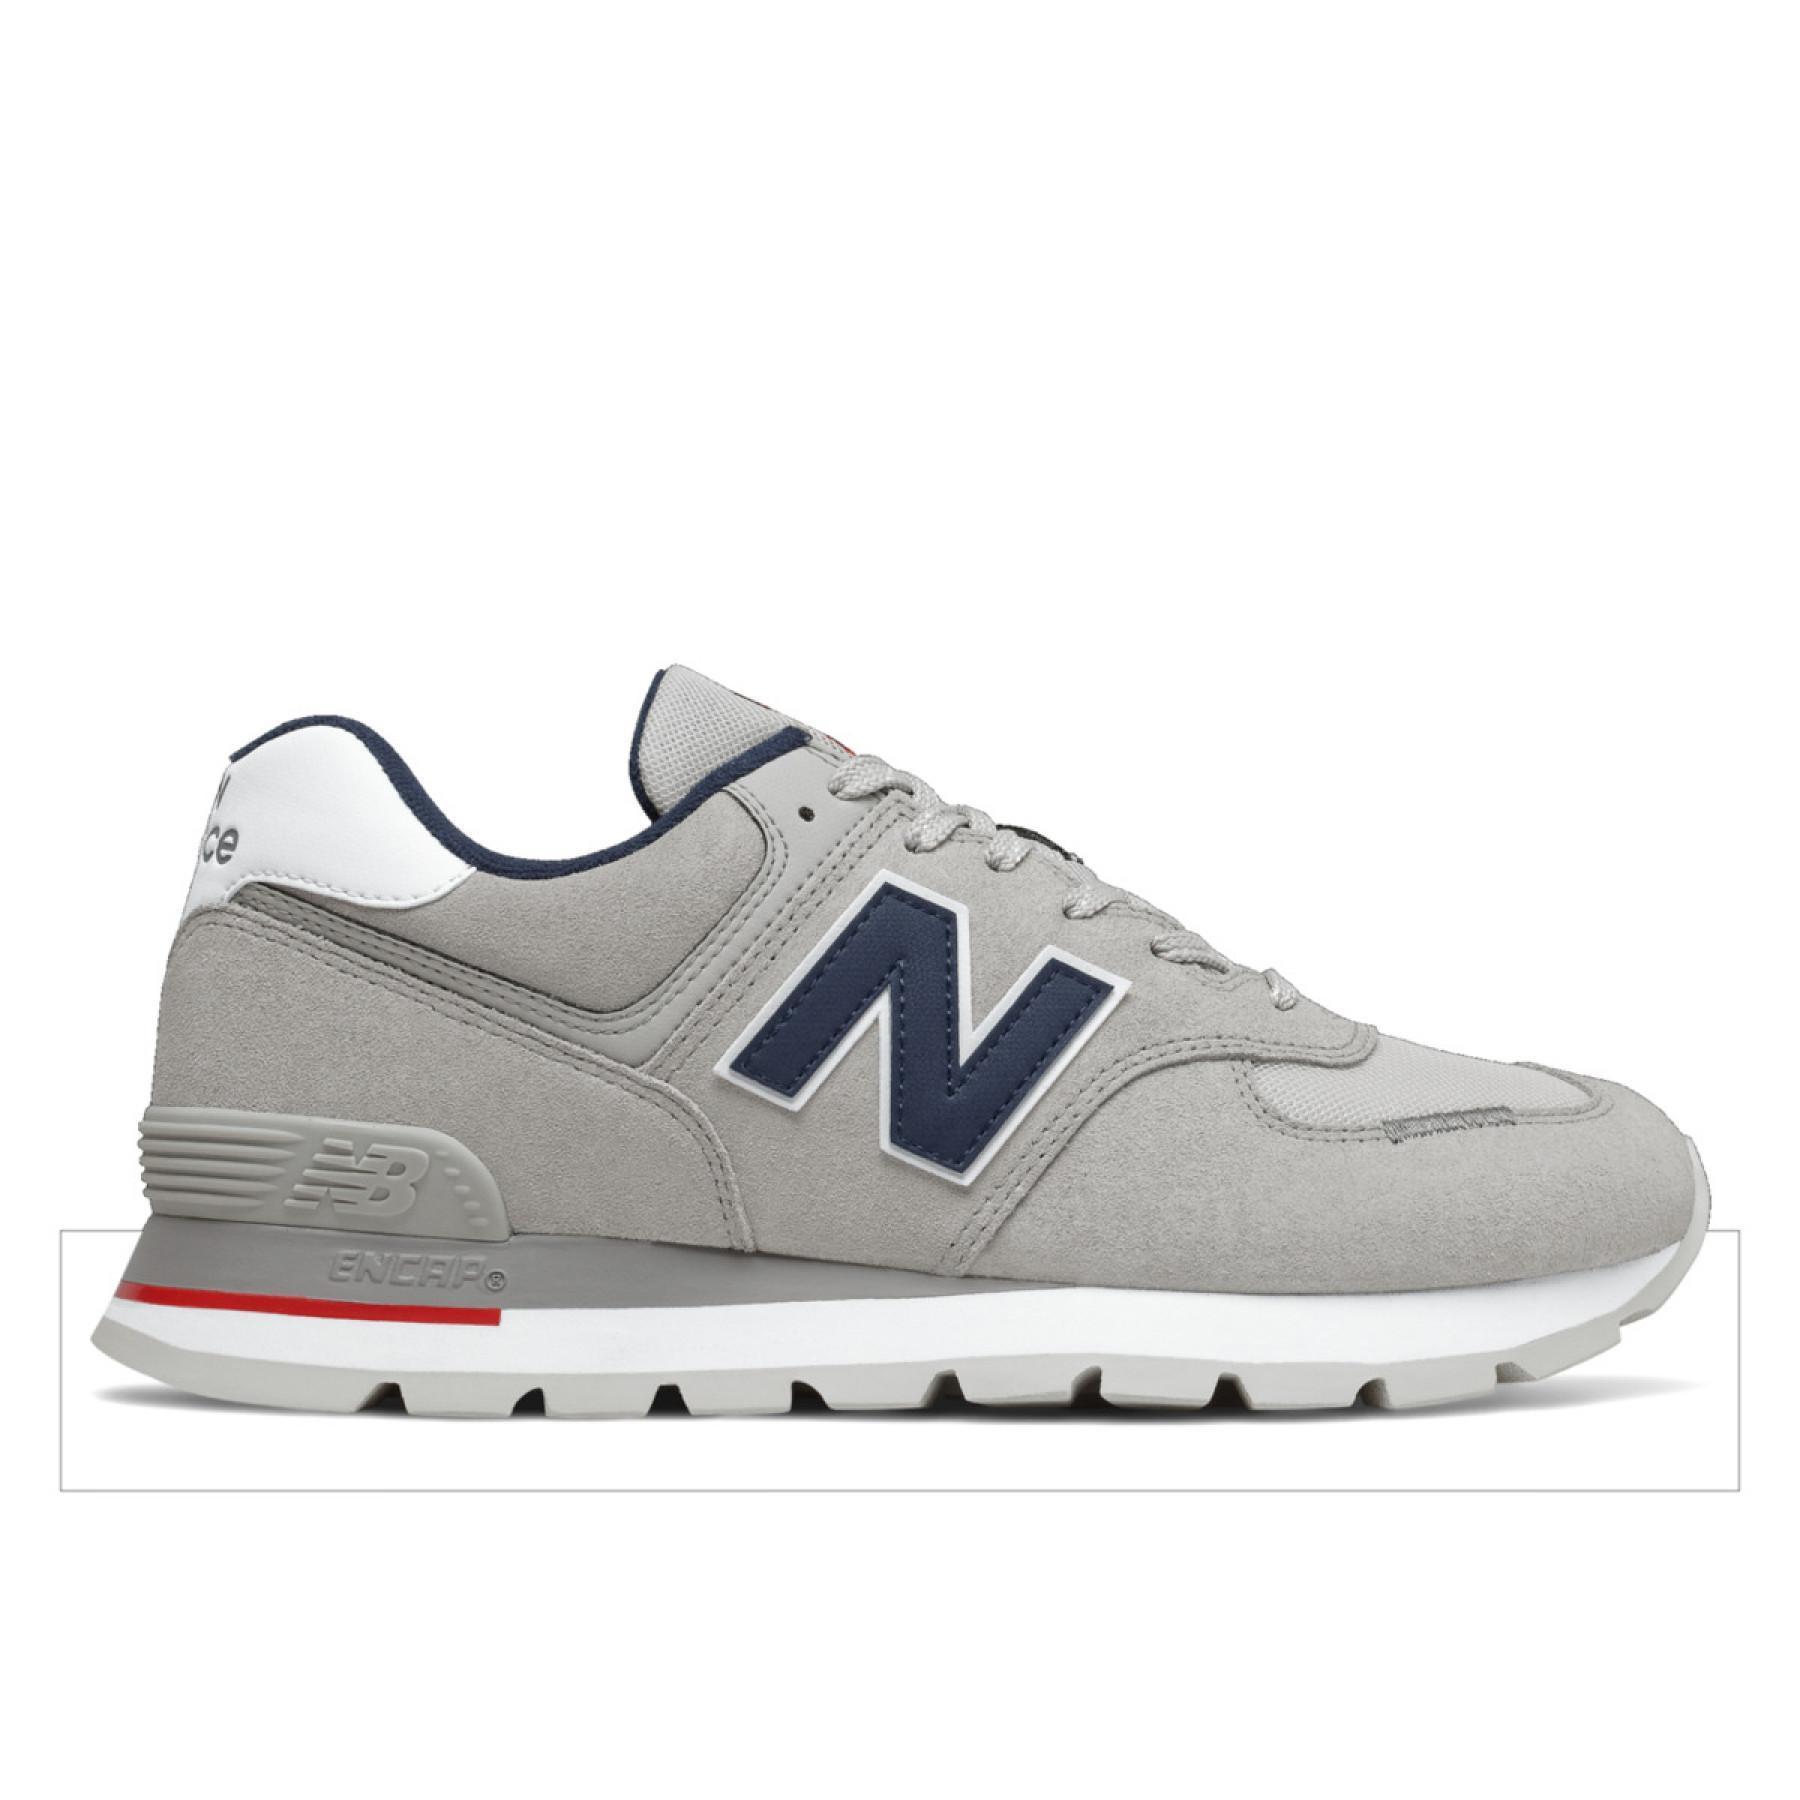 Formadores New Balance 574 rugged